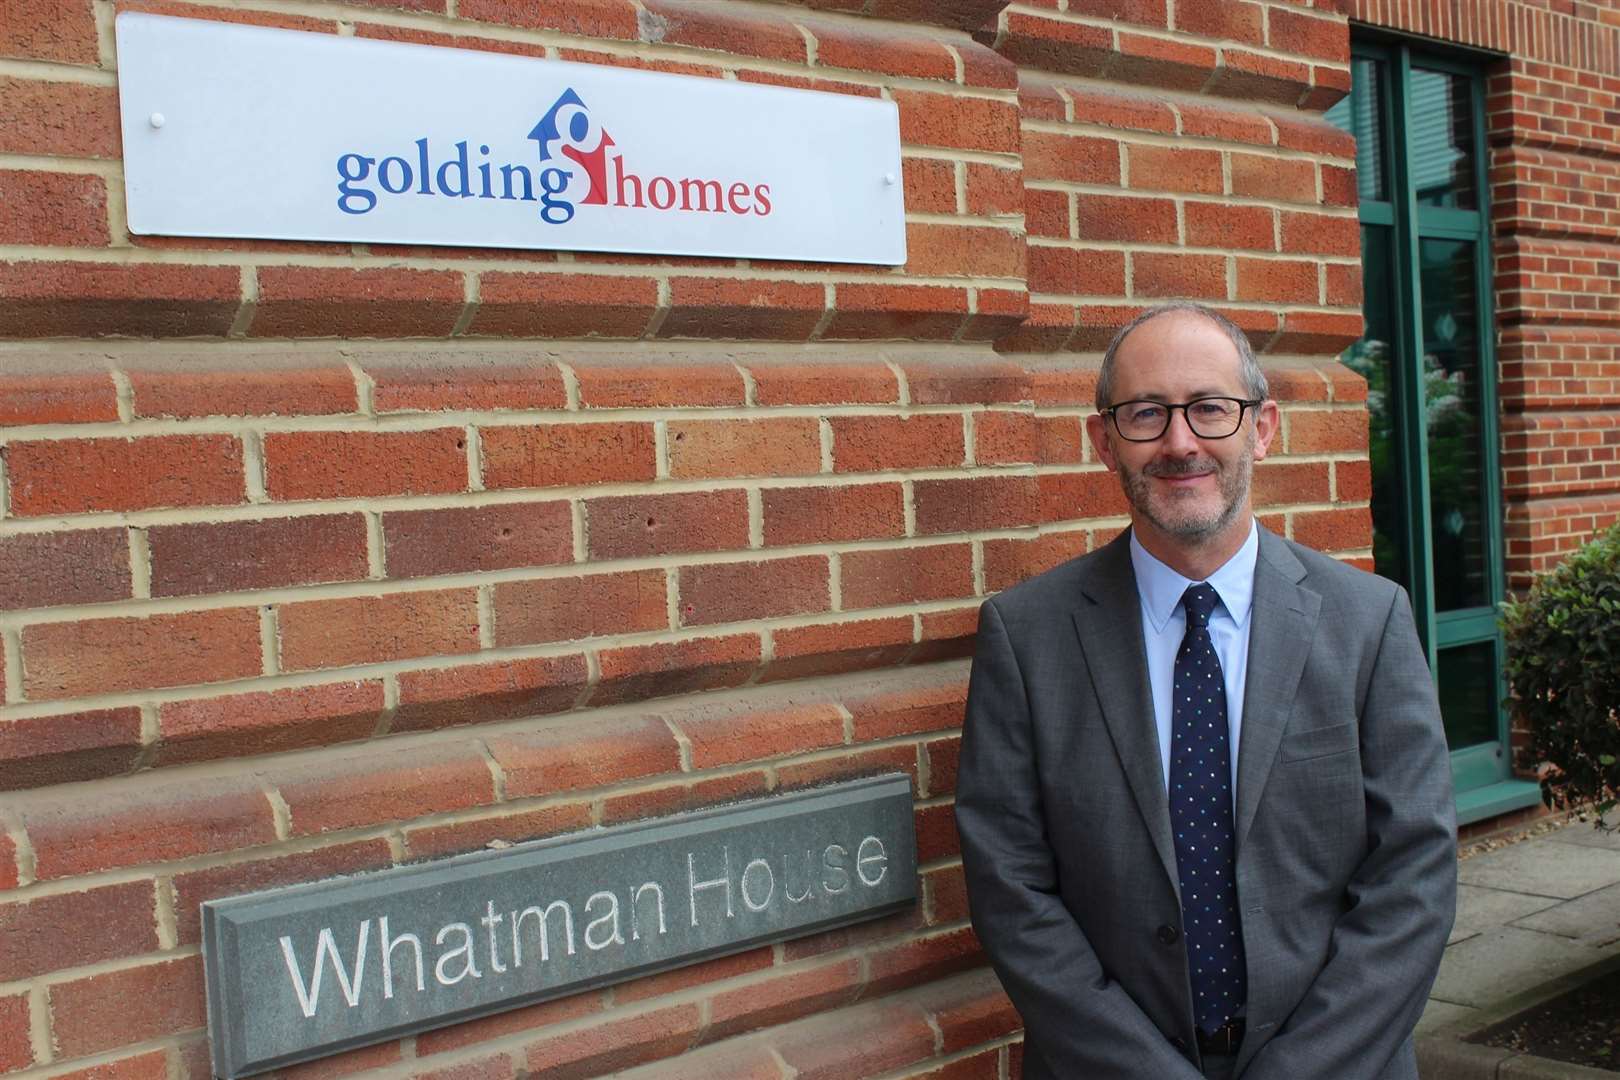 Chris Cheeseman is the chairman of Maidstone-based housing association, Golding Homes